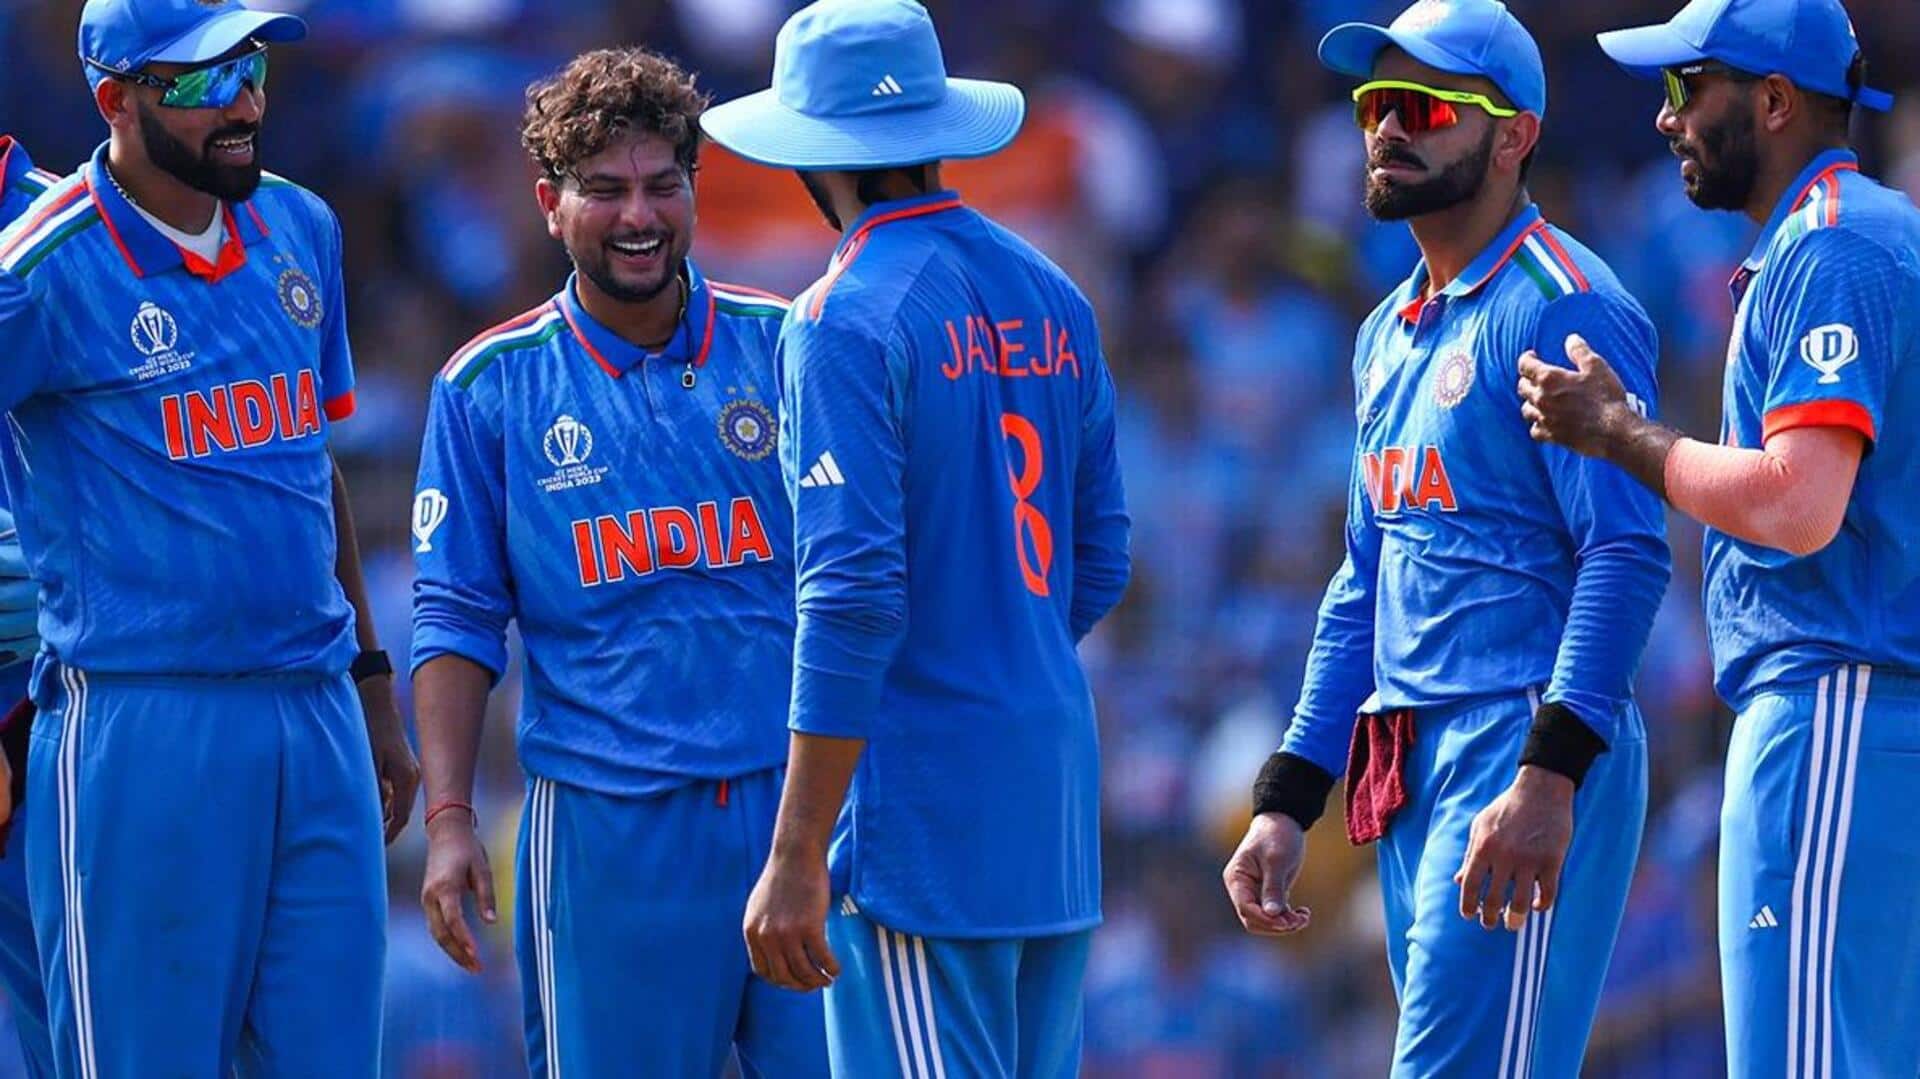 ICC Cricket World Cup, Indian spinners shine against Australia: Stats